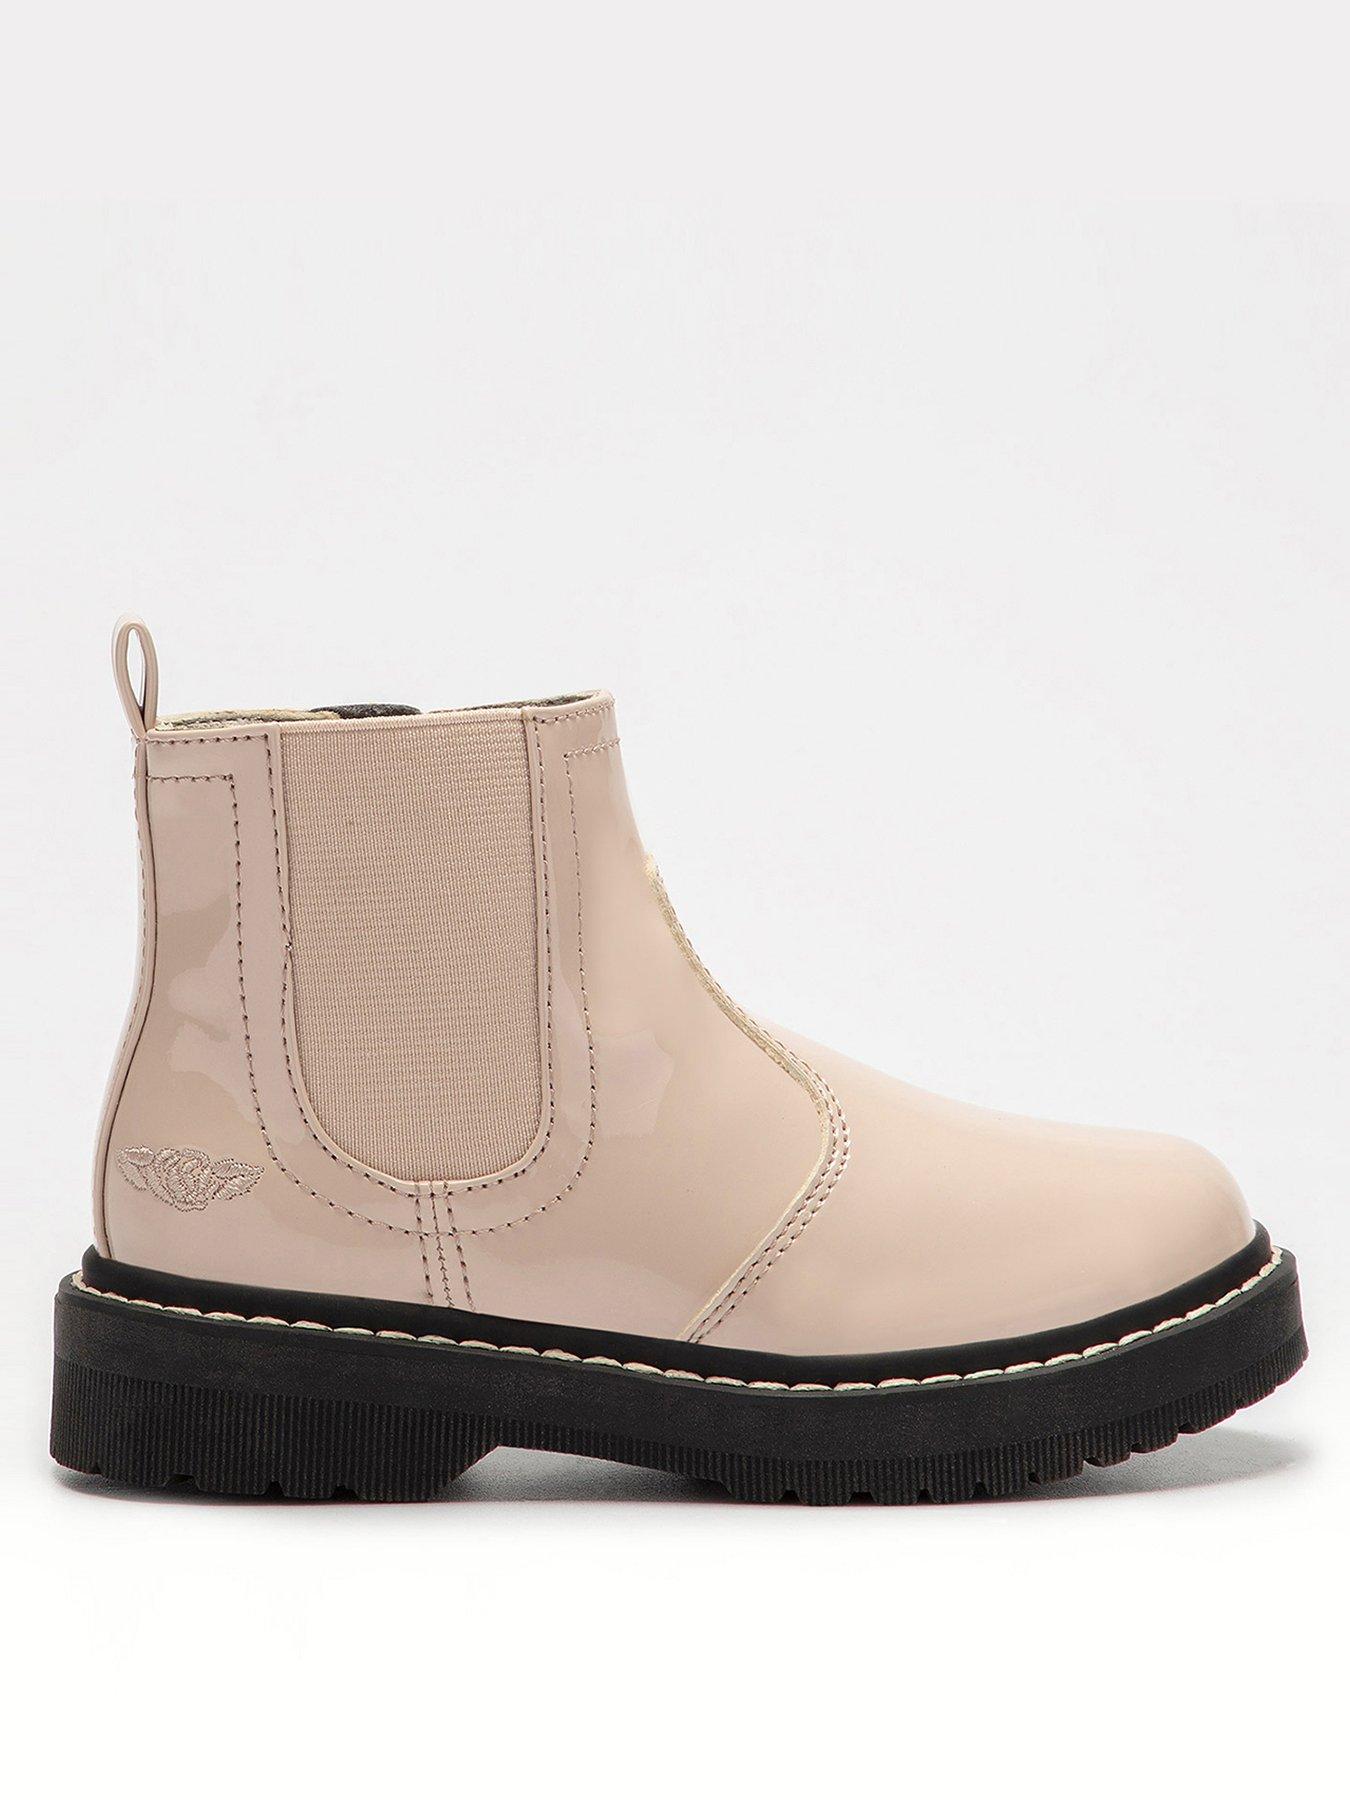  Children's Ruth Patent Chelsea Boots - Nude